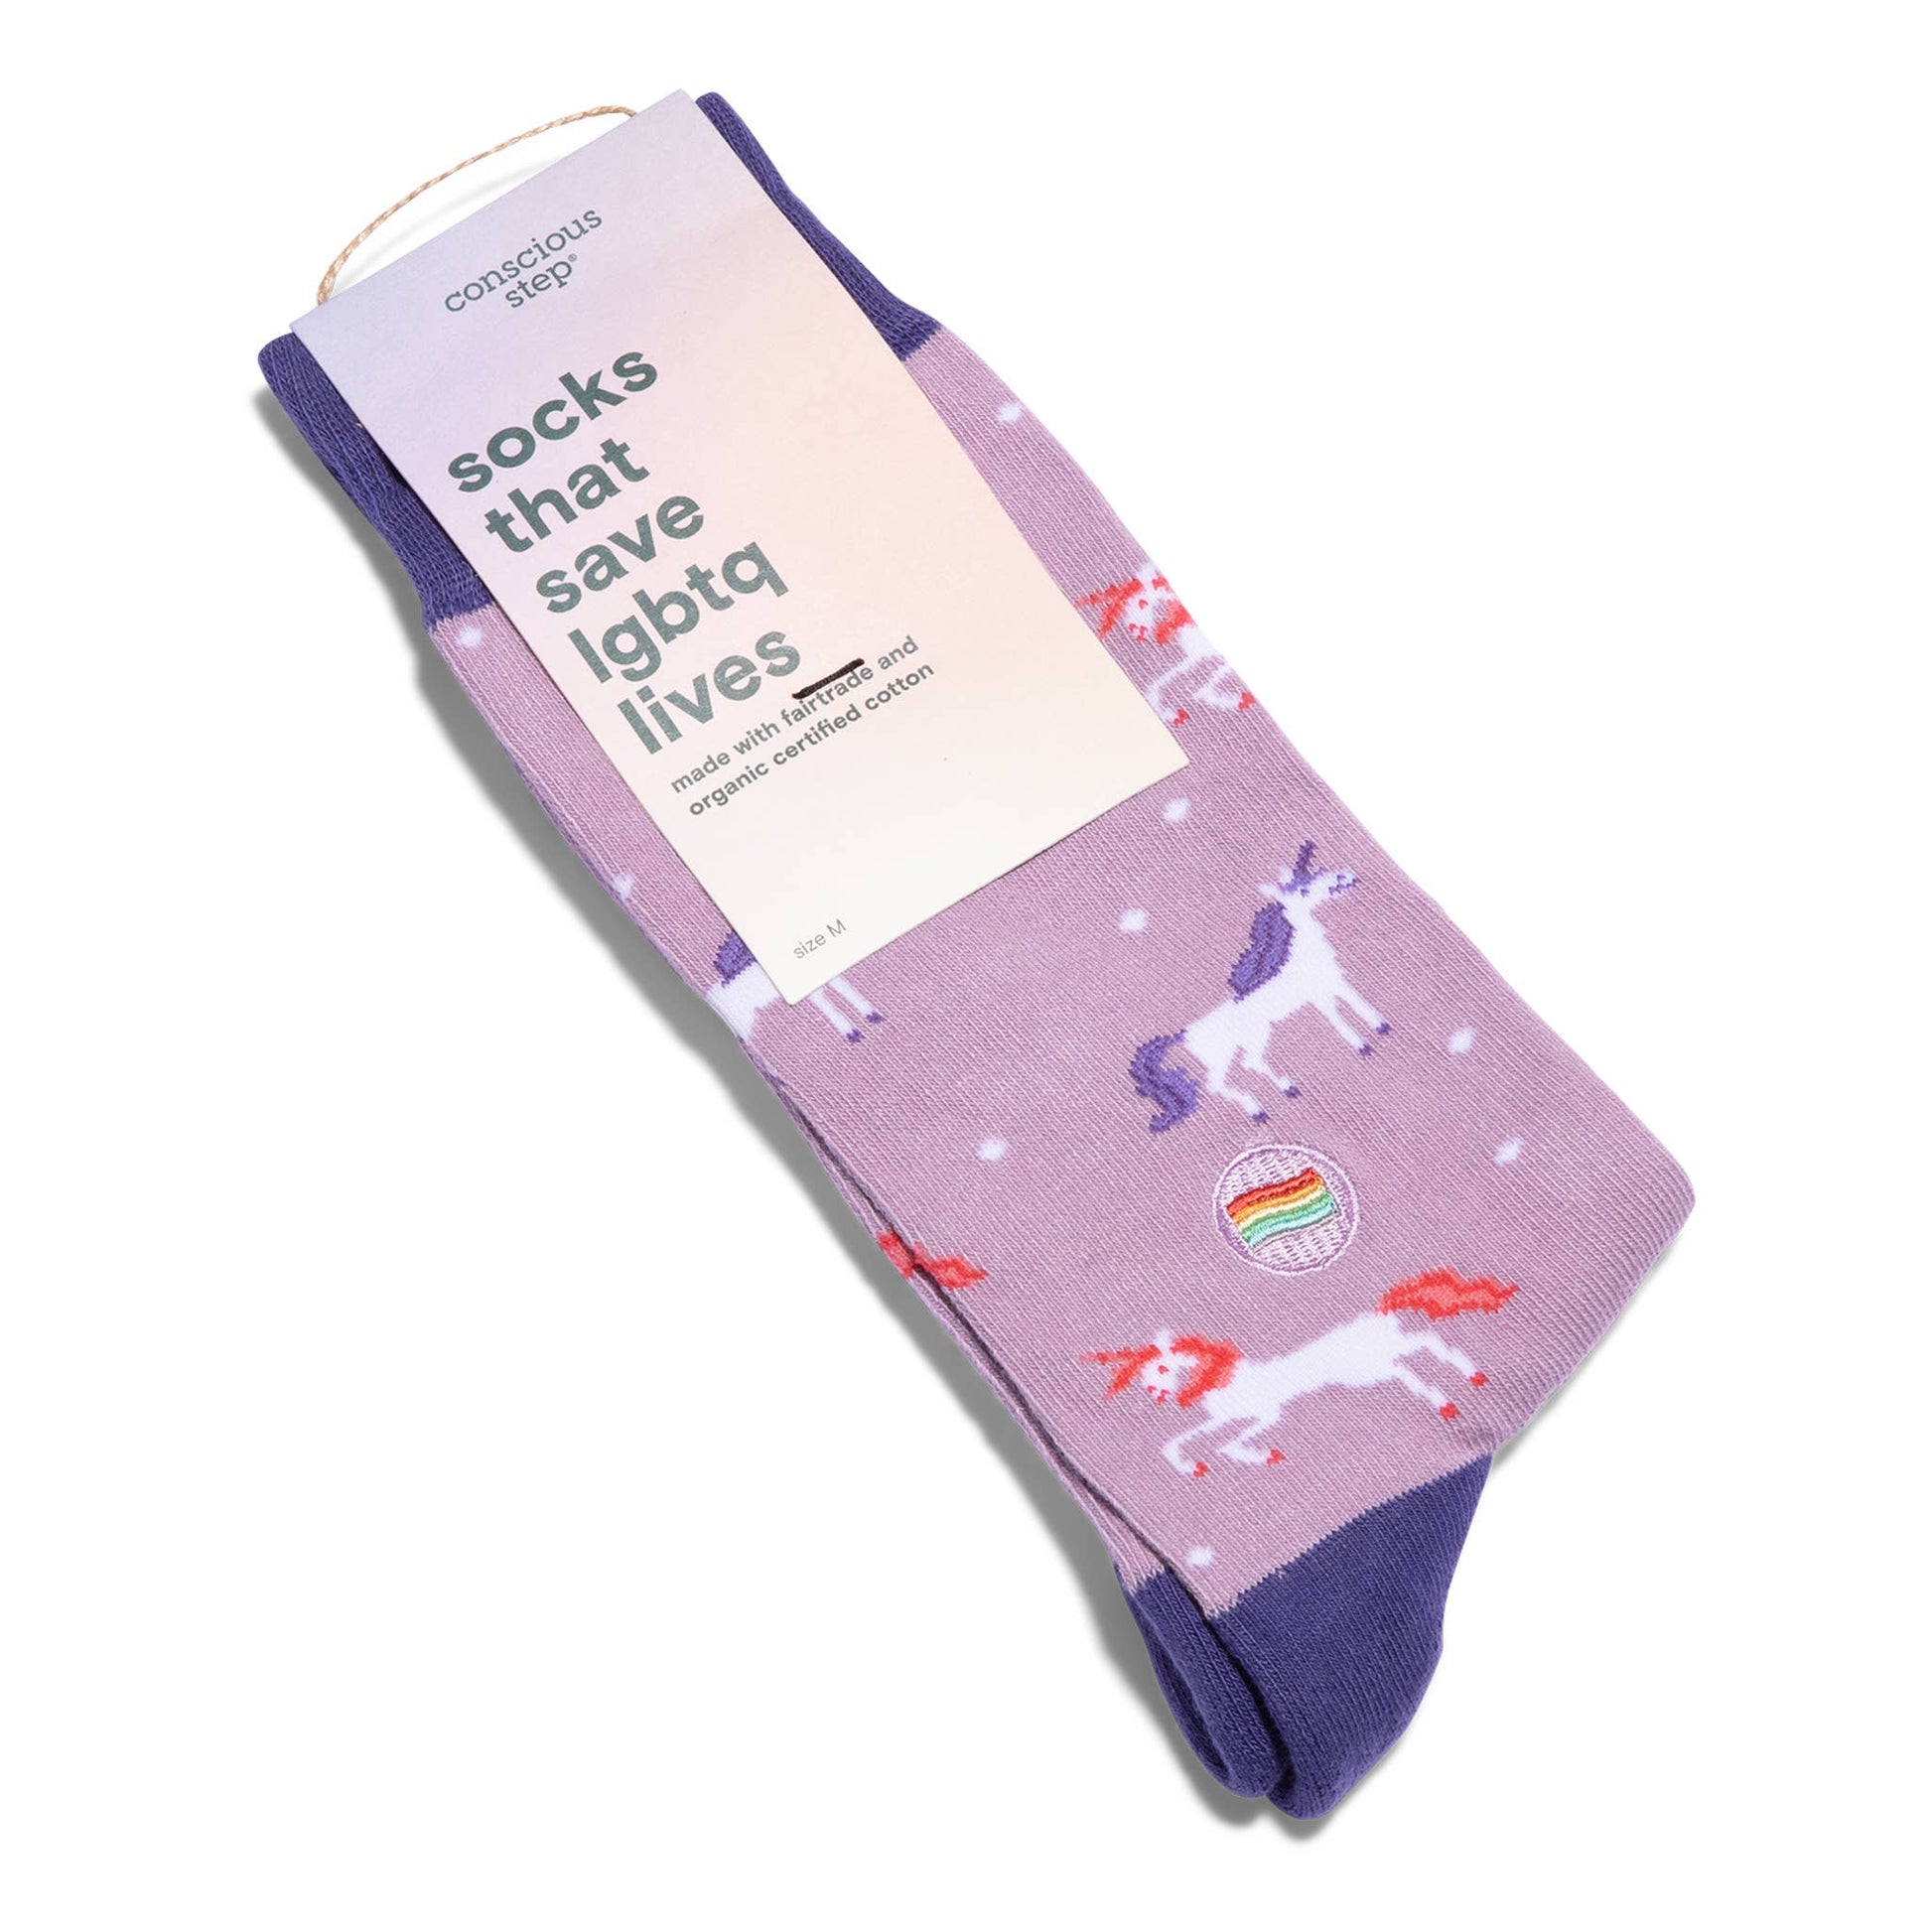 Conscious Step - Socks that Save LGBTQ Lives (Purple Unicorns)  Conscious Step   -better made easy-eco-friendly-sustainable-gifting